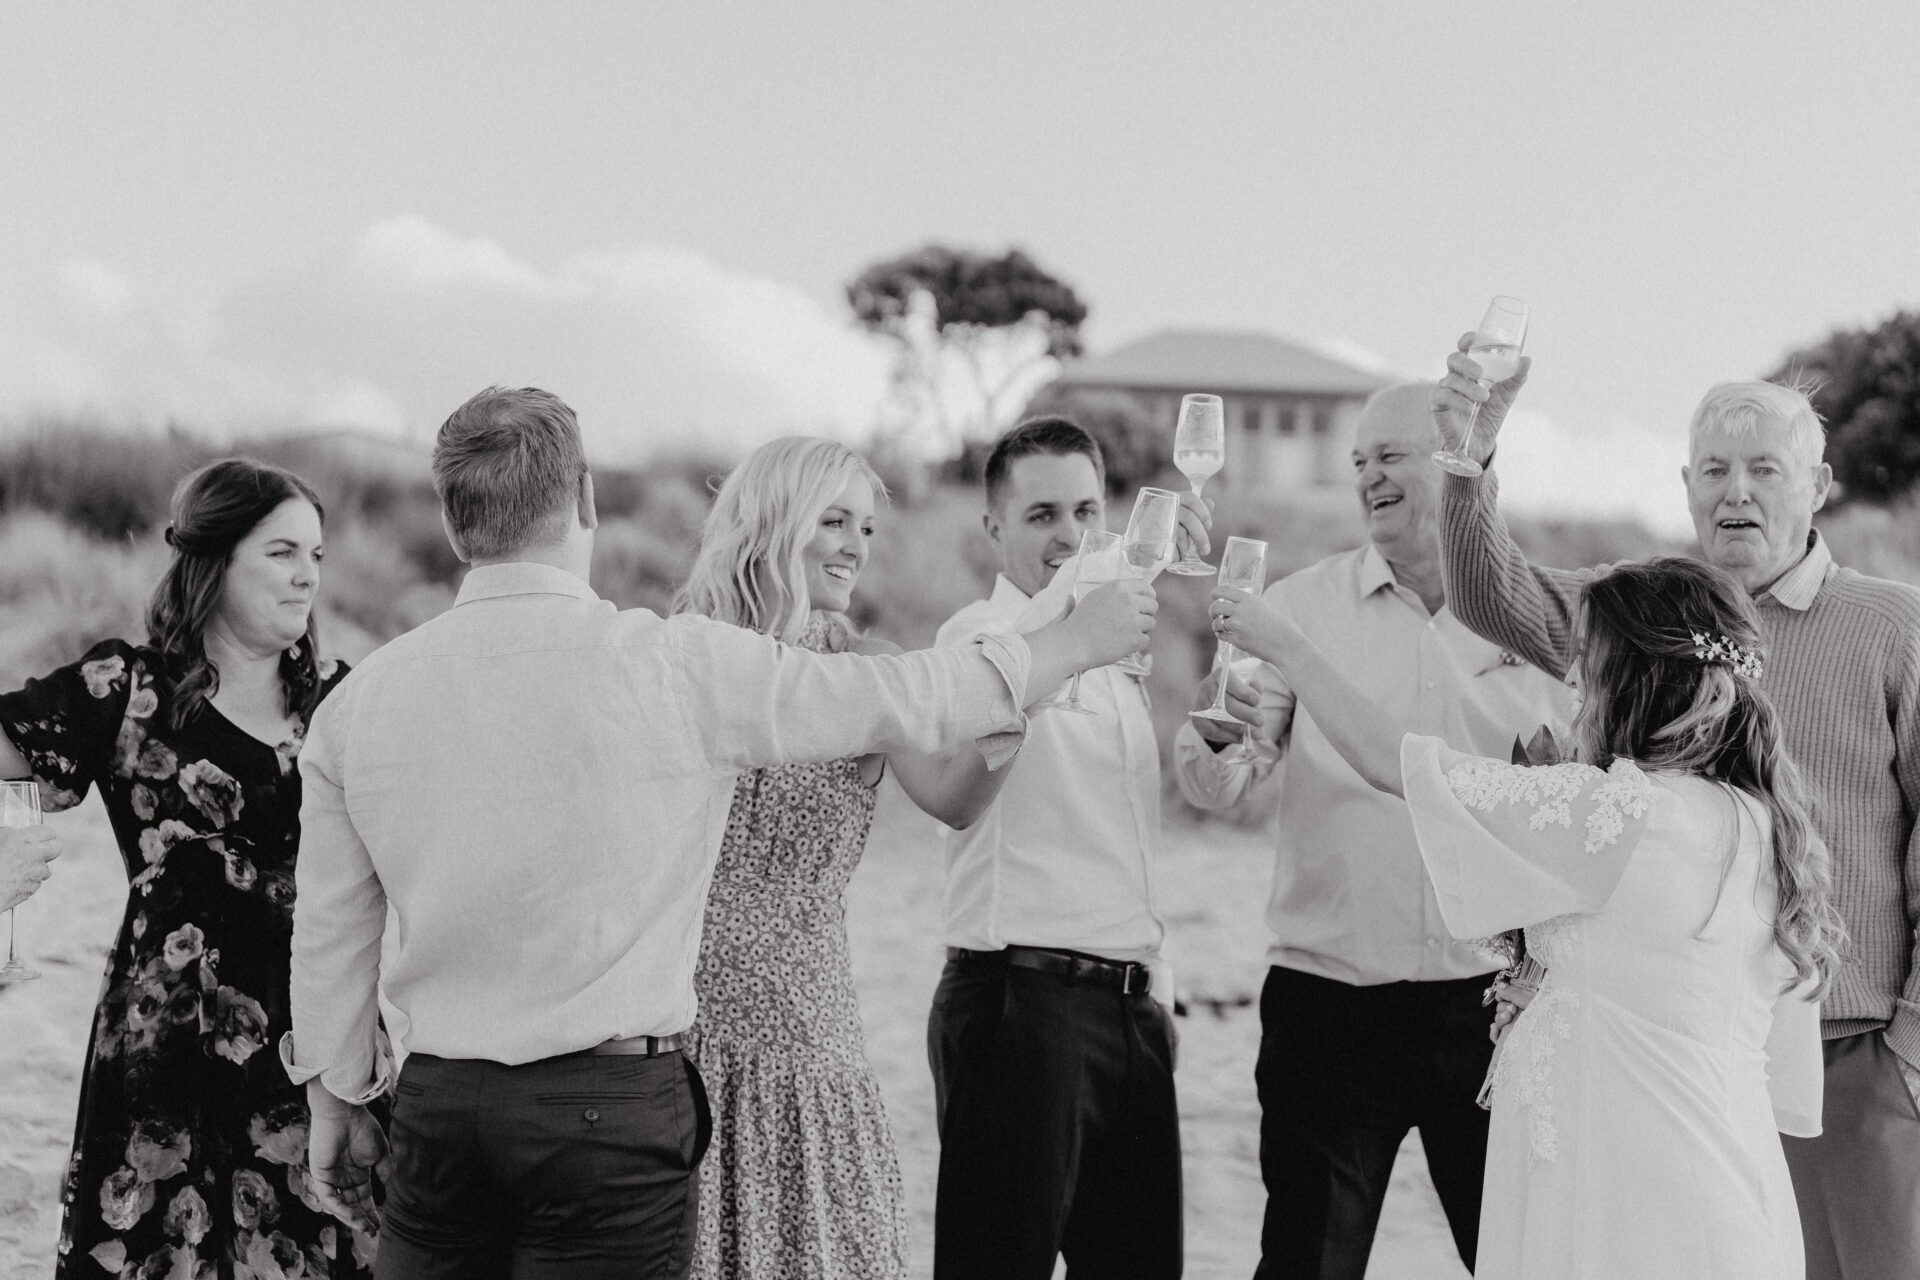 You want perfect photos from your New Zealand wedding day that will last forever